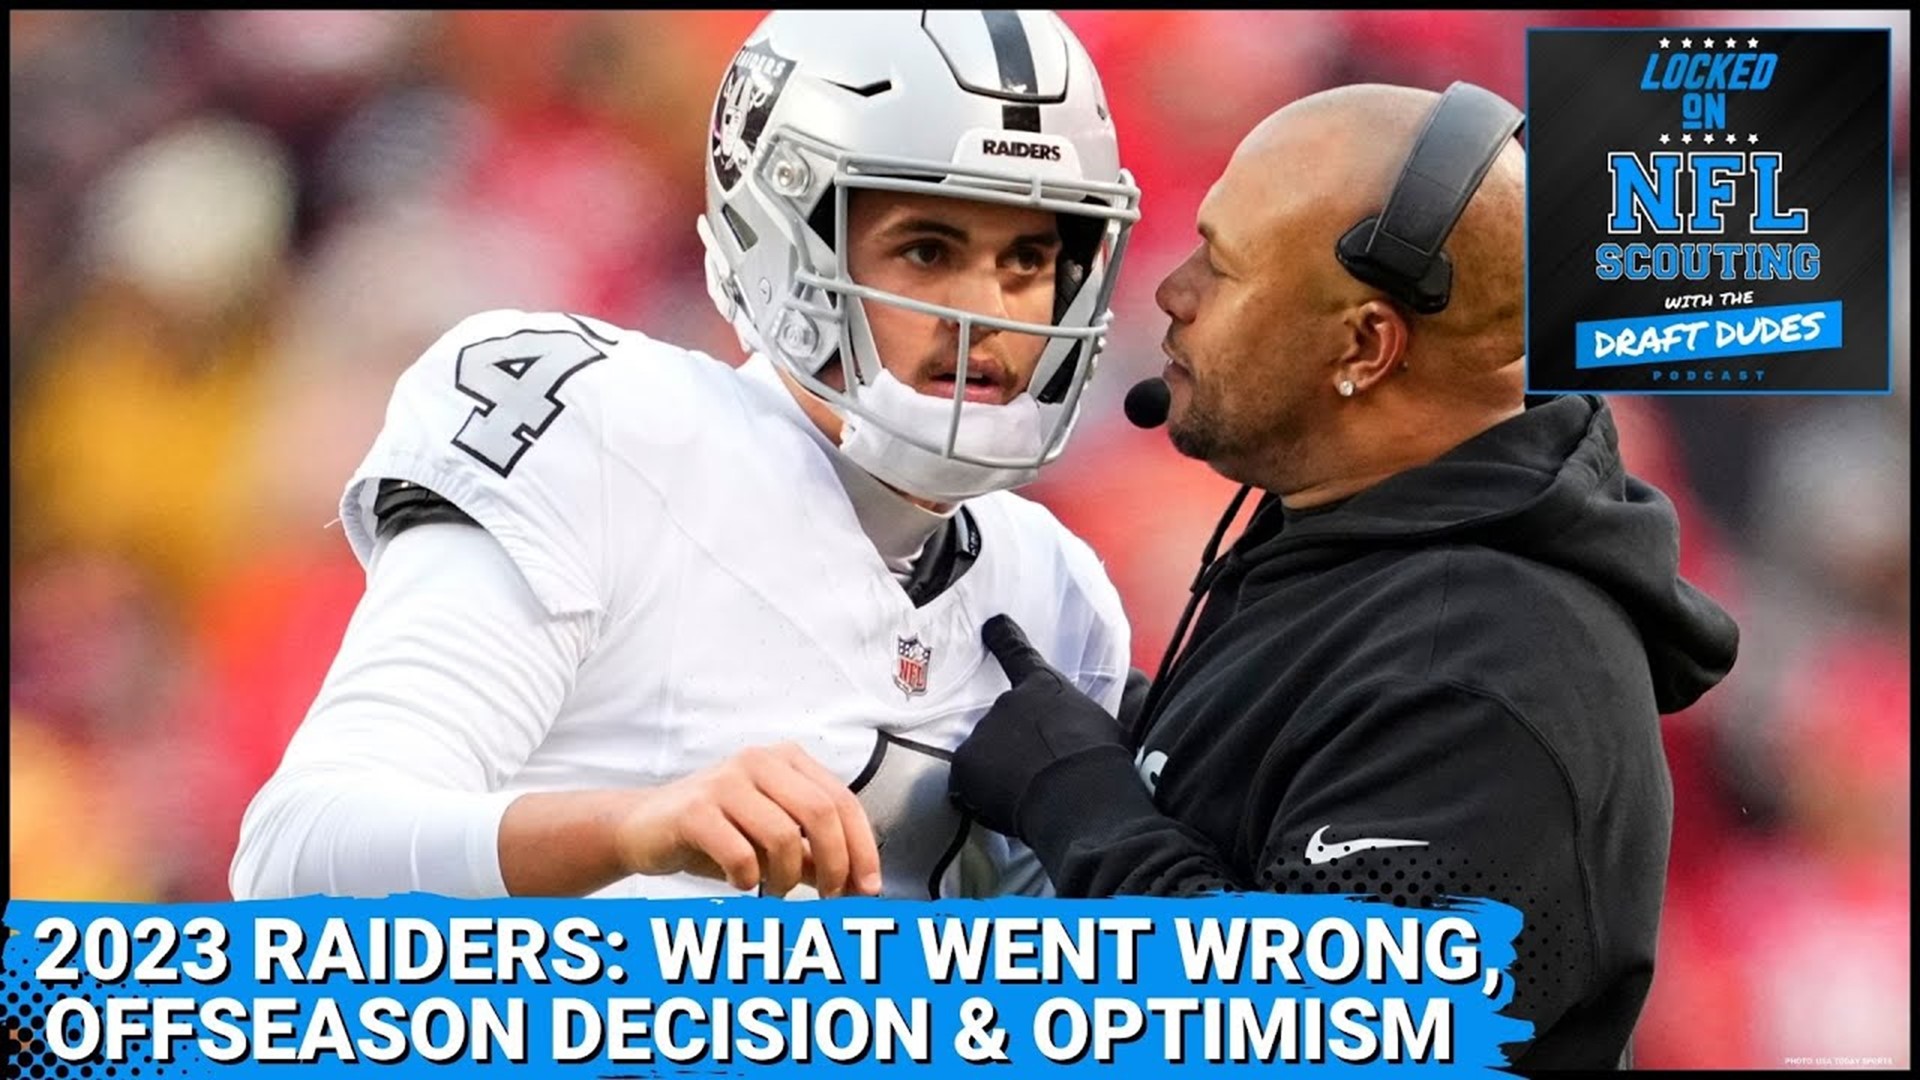 The Las Vegas Raiders didn’t make the playoffs so it’s time to consider what went wrong, what big decisions are coming and where fans can find room to be optimistic